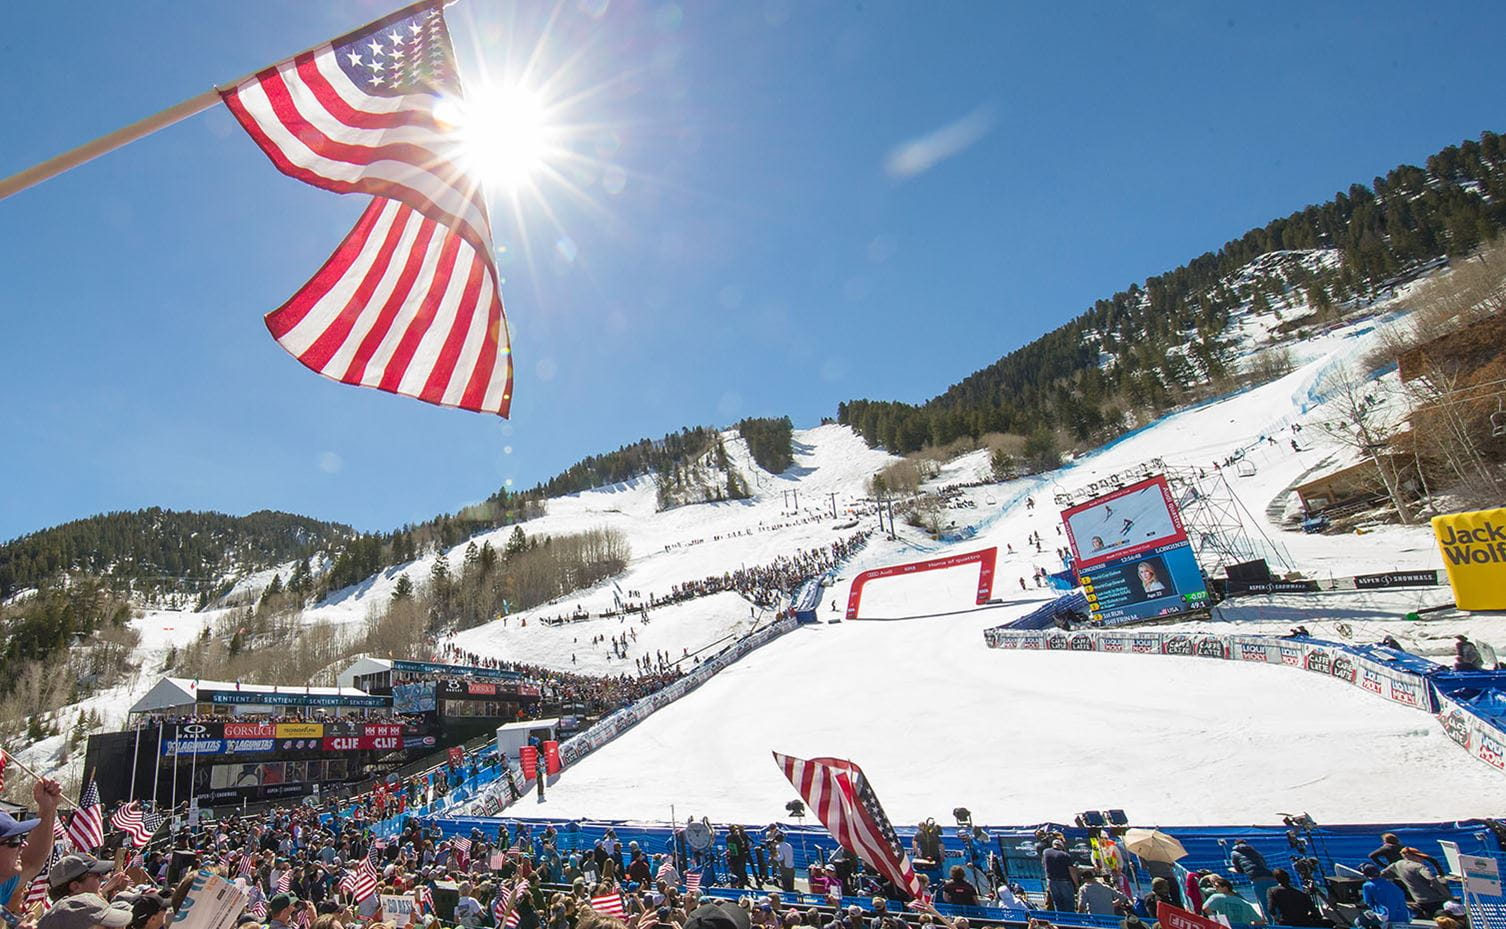 Americas Downhill returns with Aspen World Cup March 3-5, on Aspen Mountain. 